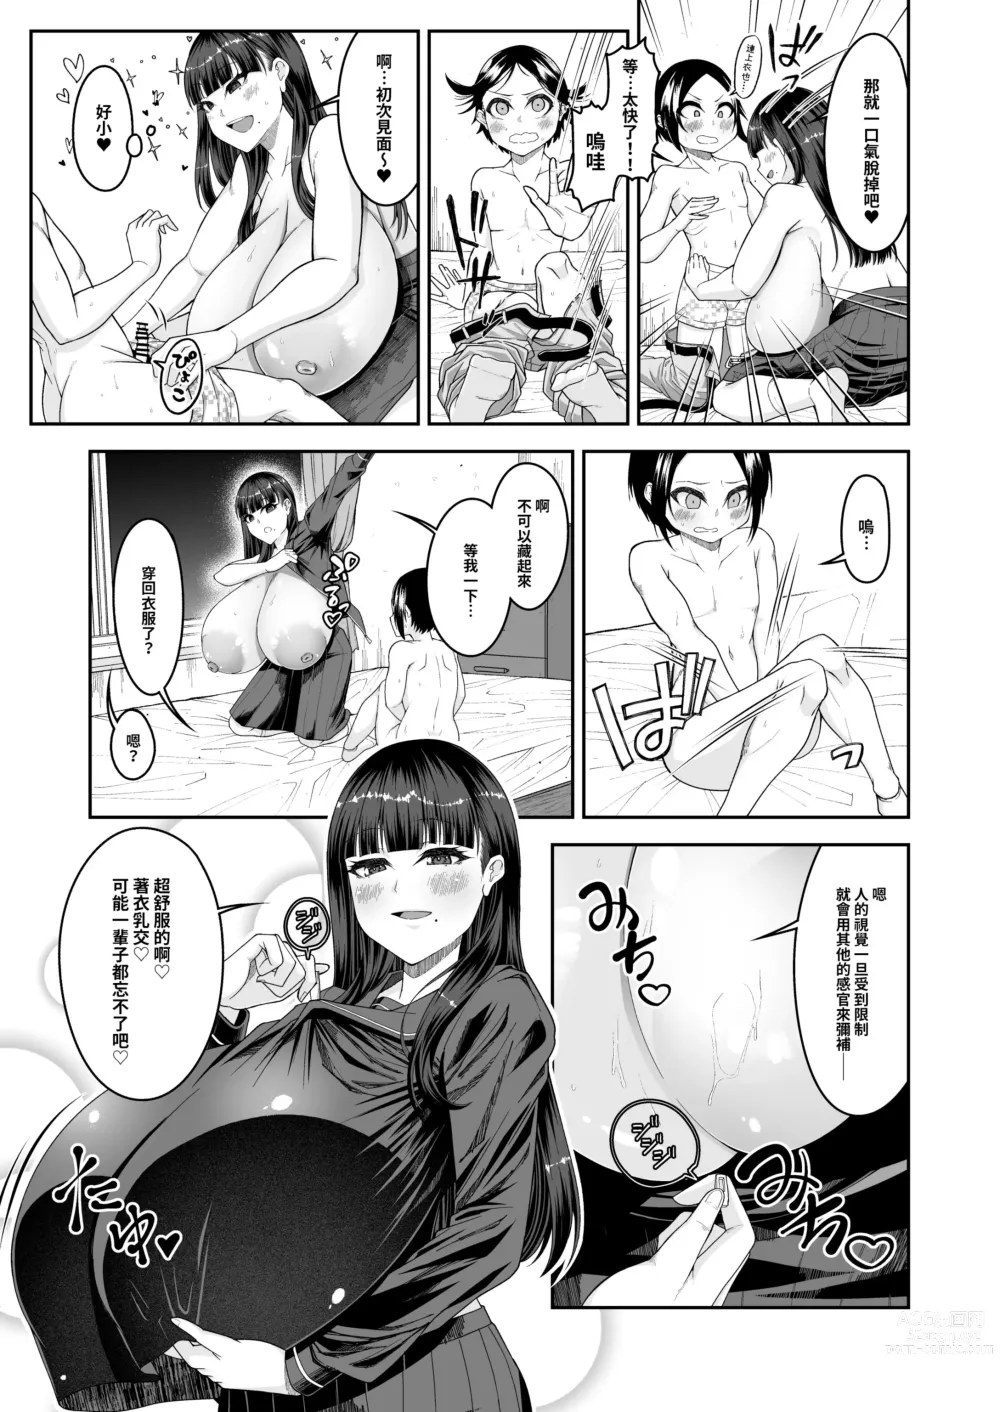 Page 14 of doujinshi 白肉的軟棉與黑肉的軟彈